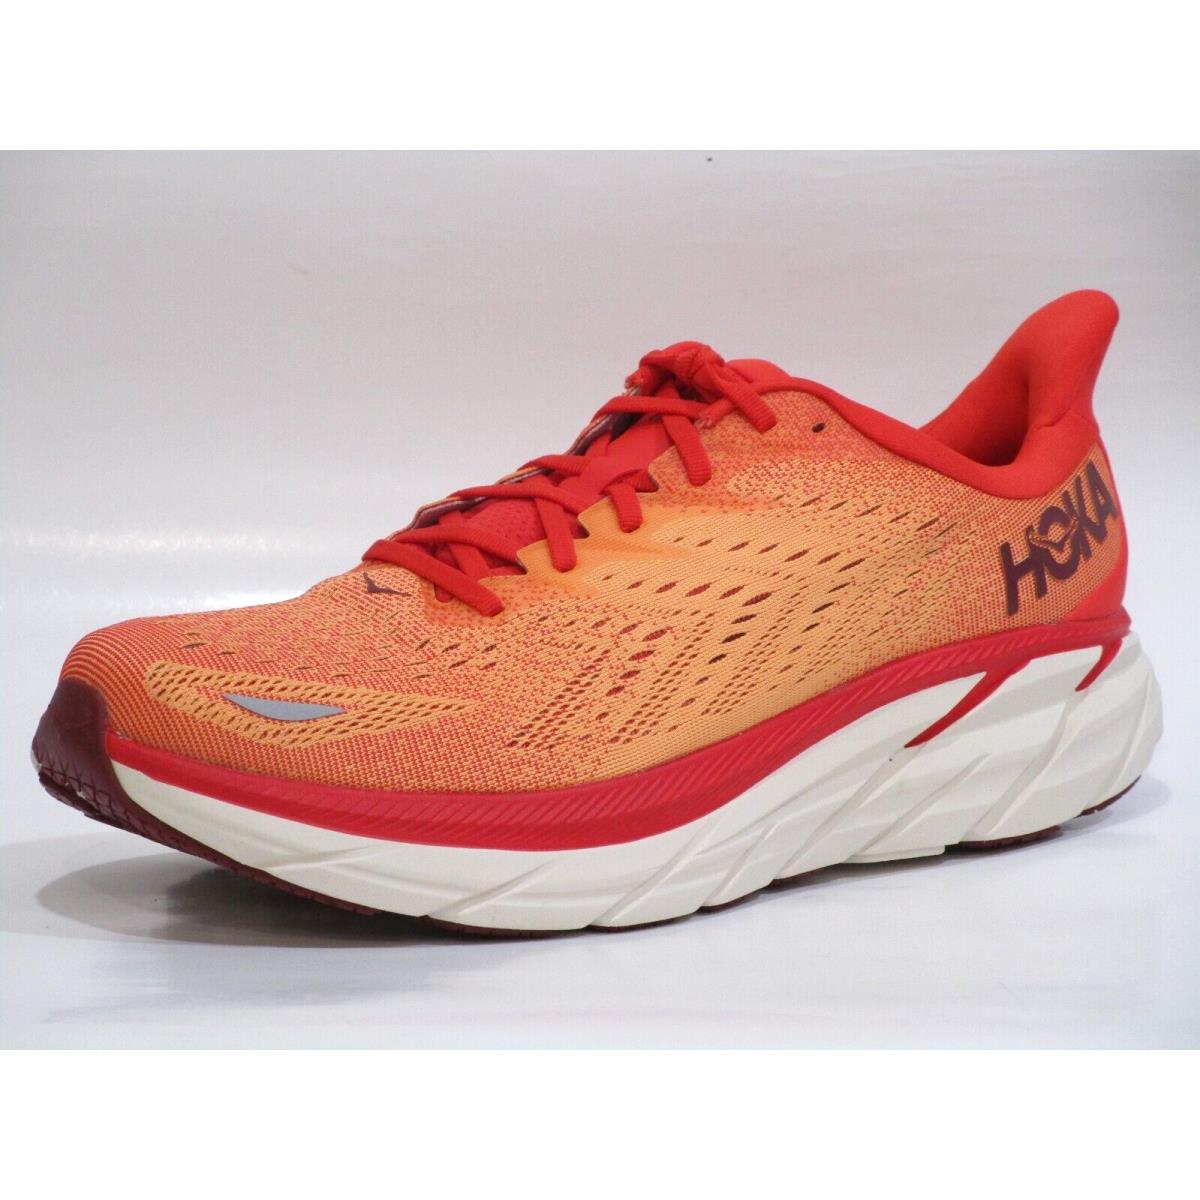 Hoka One One Men`s Clifton 8 Running Sneaker Shoes Size 12 D M US